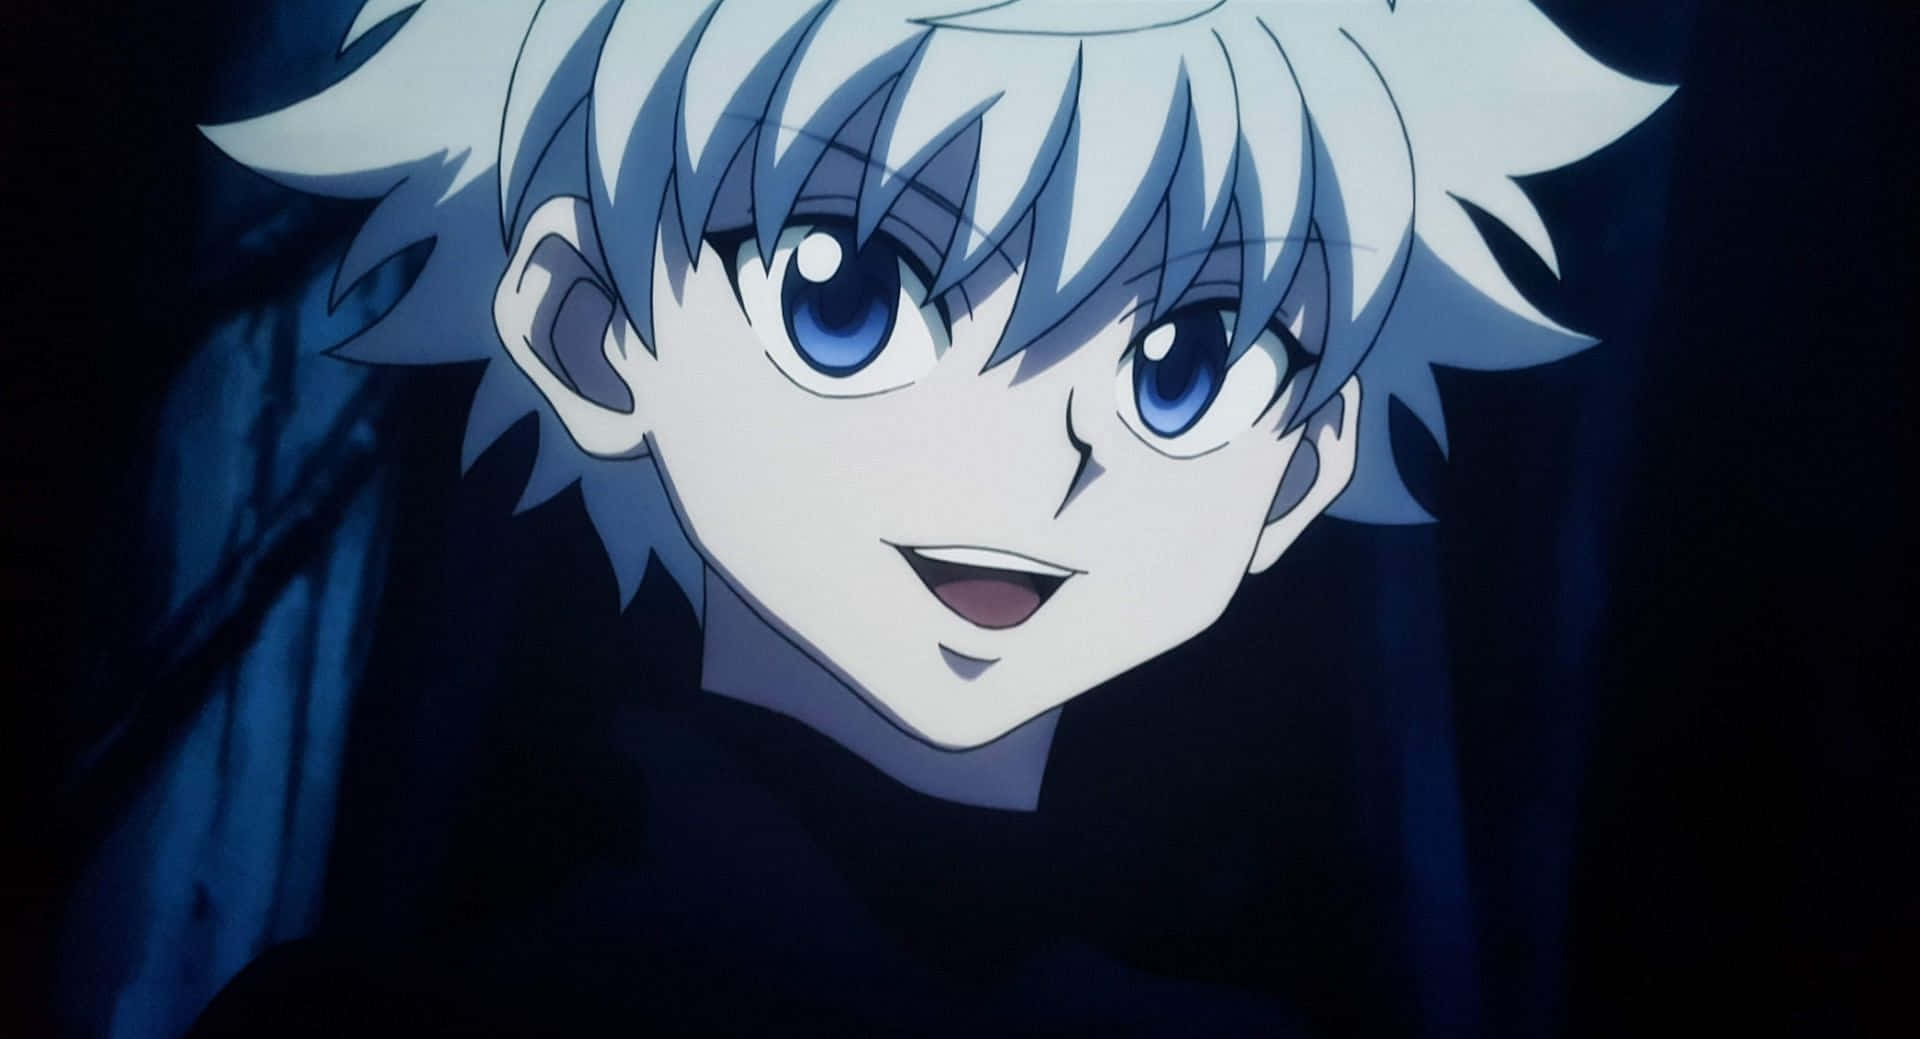 Killua - A Powerful and Skilled Fighter